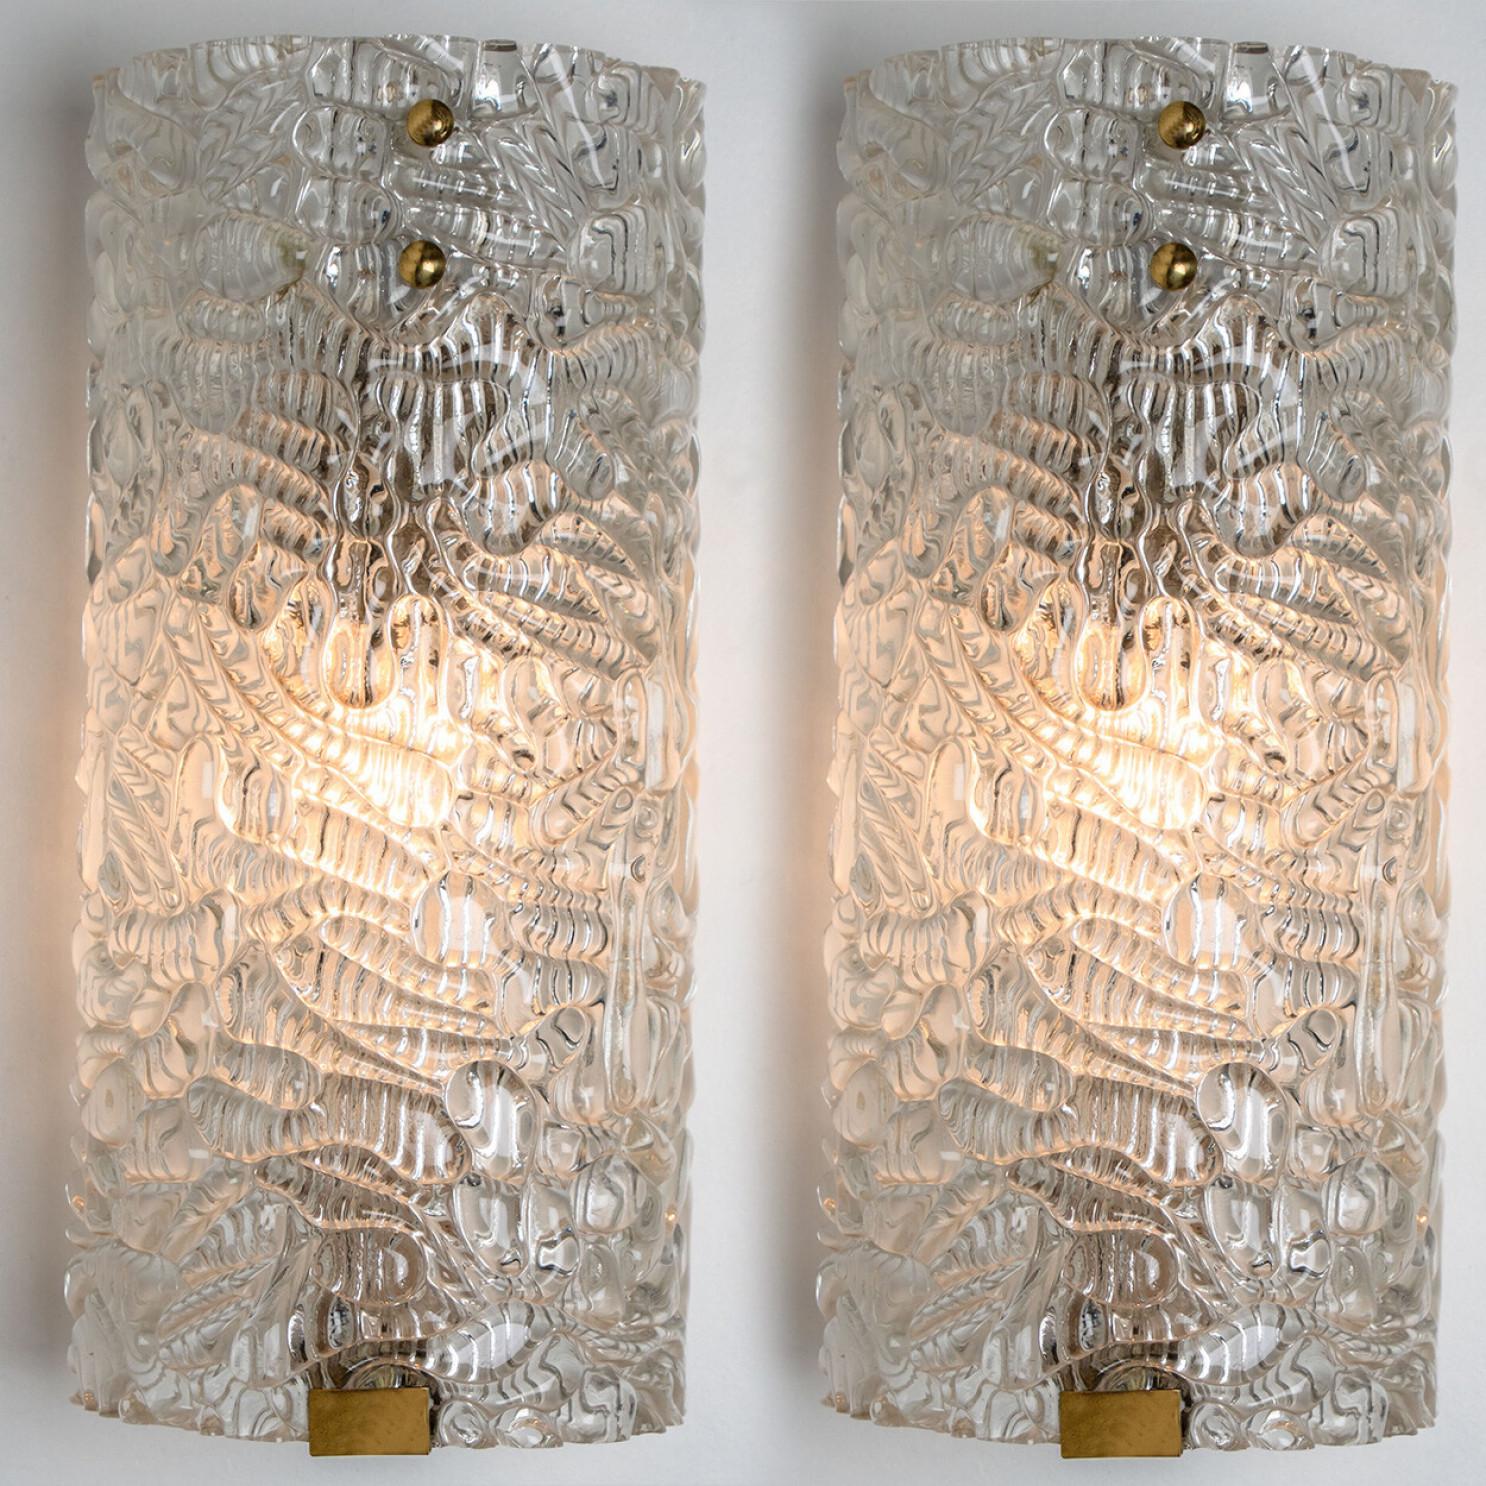 Other A pair of Clear Bubbled Glass Wall Light Fixtures by Hillebrand, Germany, 1960s For Sale